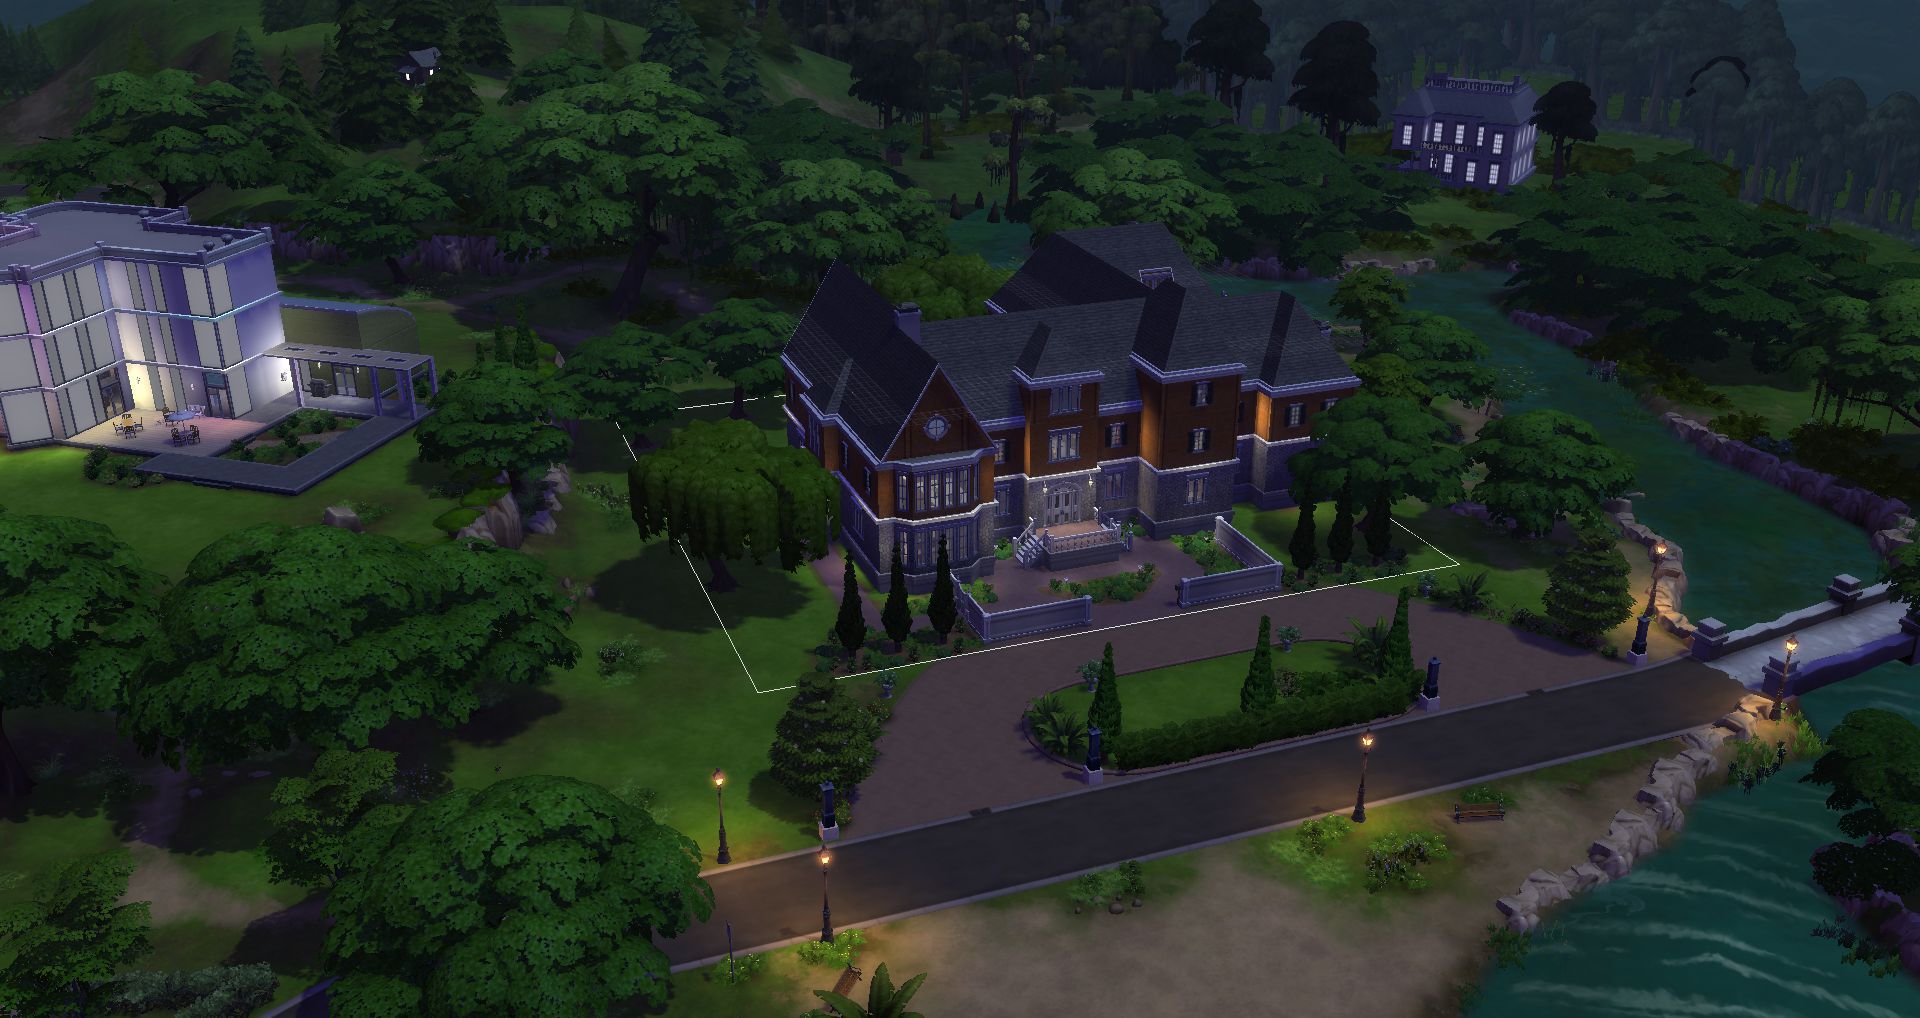 Mod The Sims - [OLD] Chateau du Landgraab for TS4 [remake/port] [No CC]